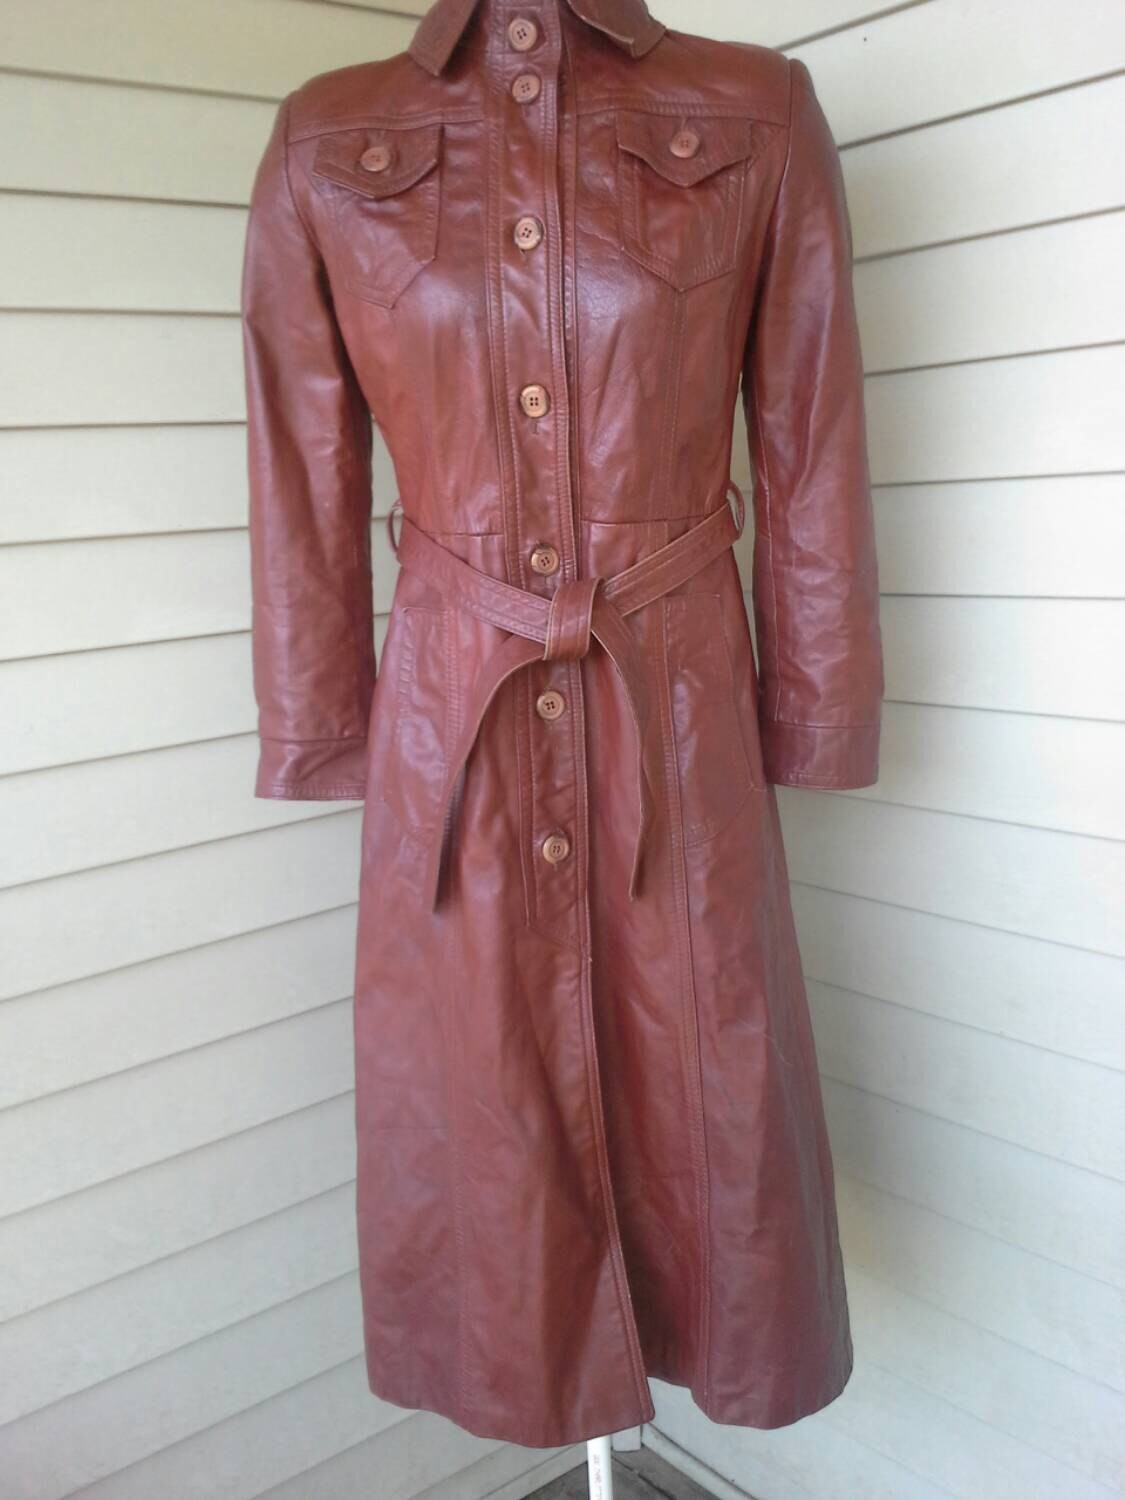 70's Leather Jacket/fitted/ Long Jacket/brown Leather - Etsy